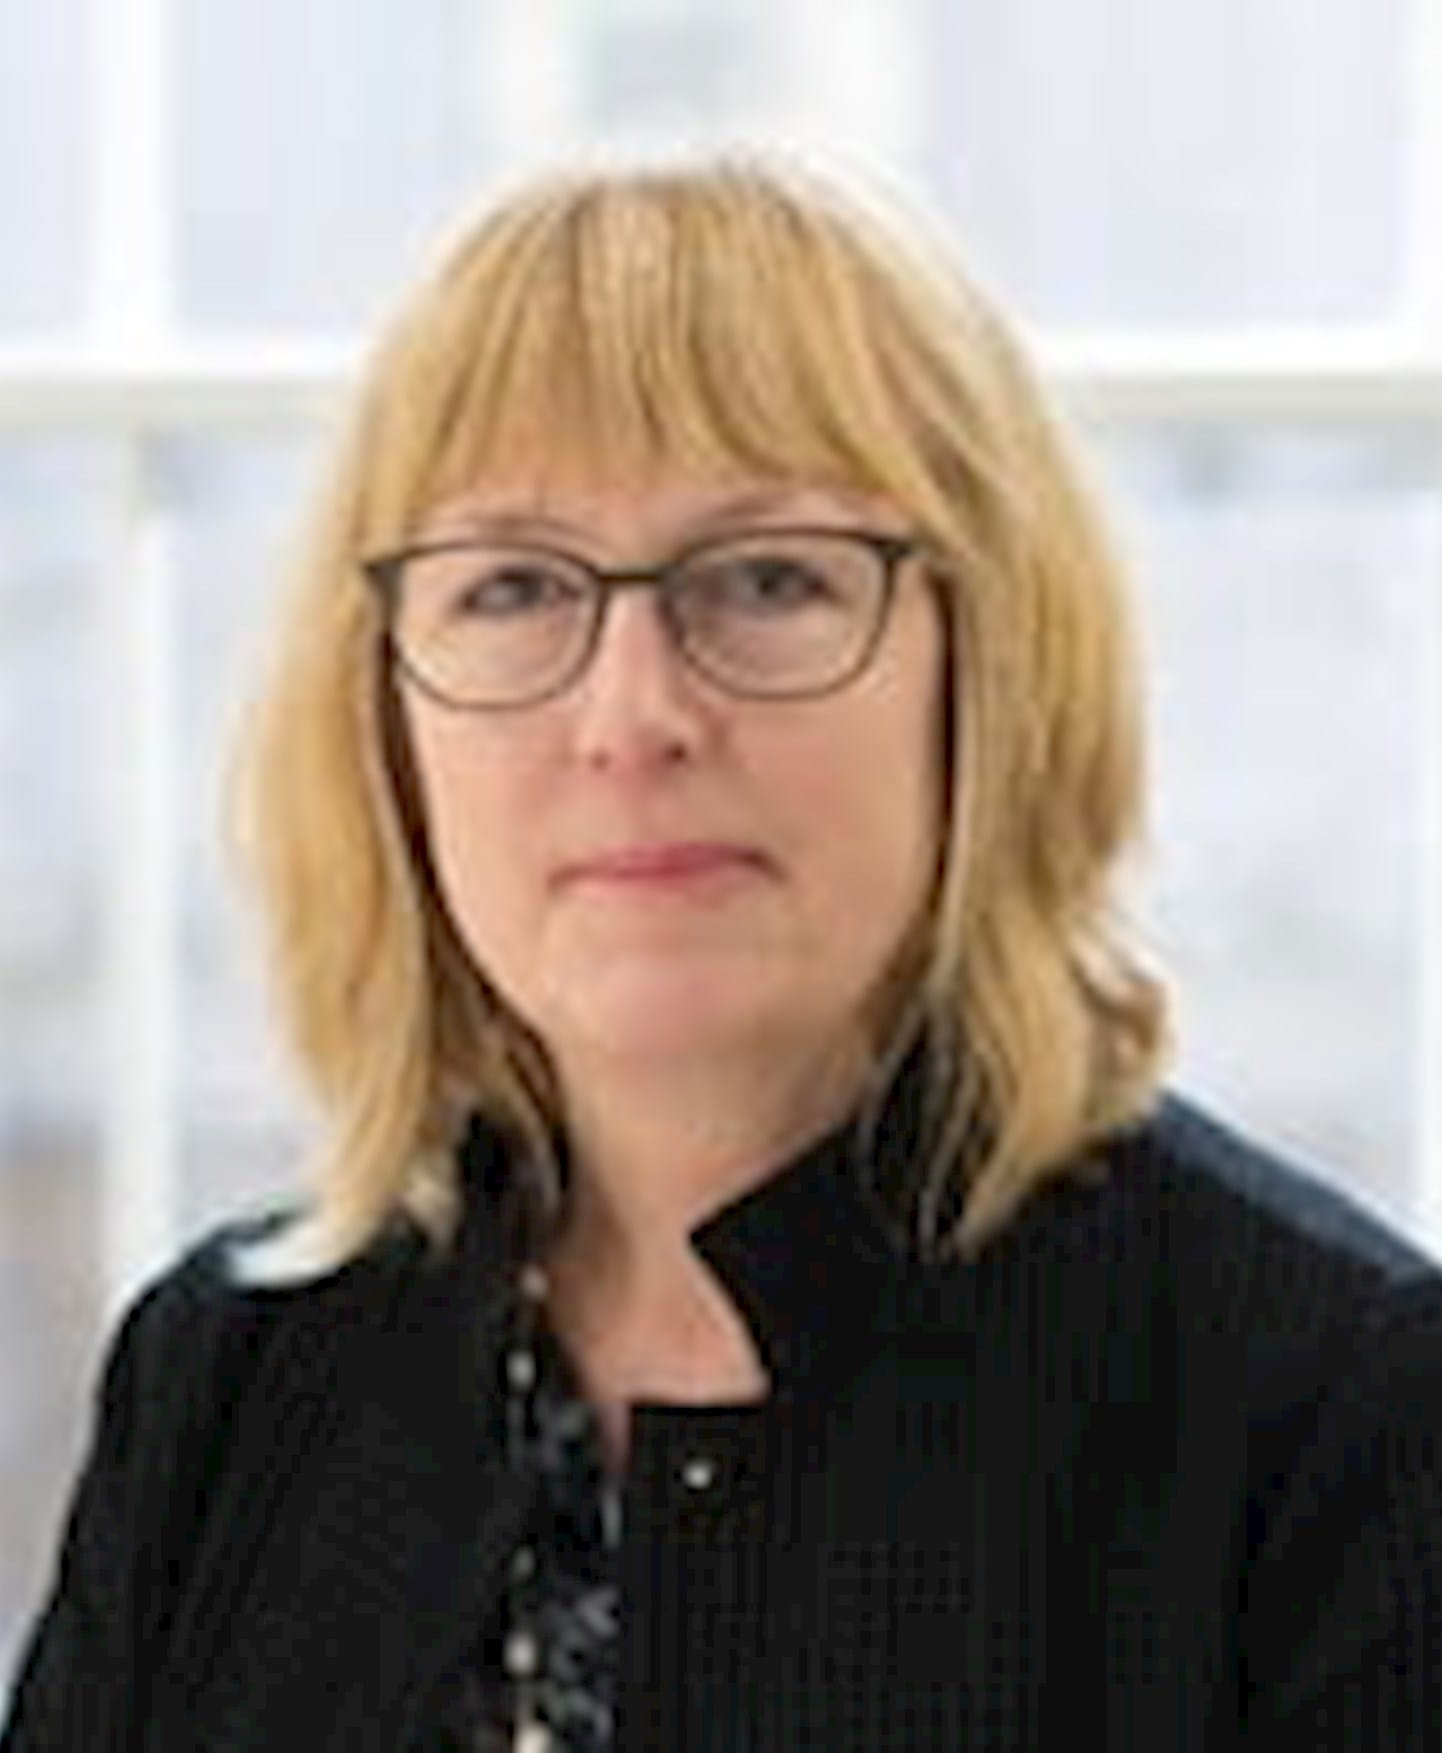 Profile picture of Kim Gray, Head of Insurance and  Head of Diversity & Inclusion at NTT DATA UK